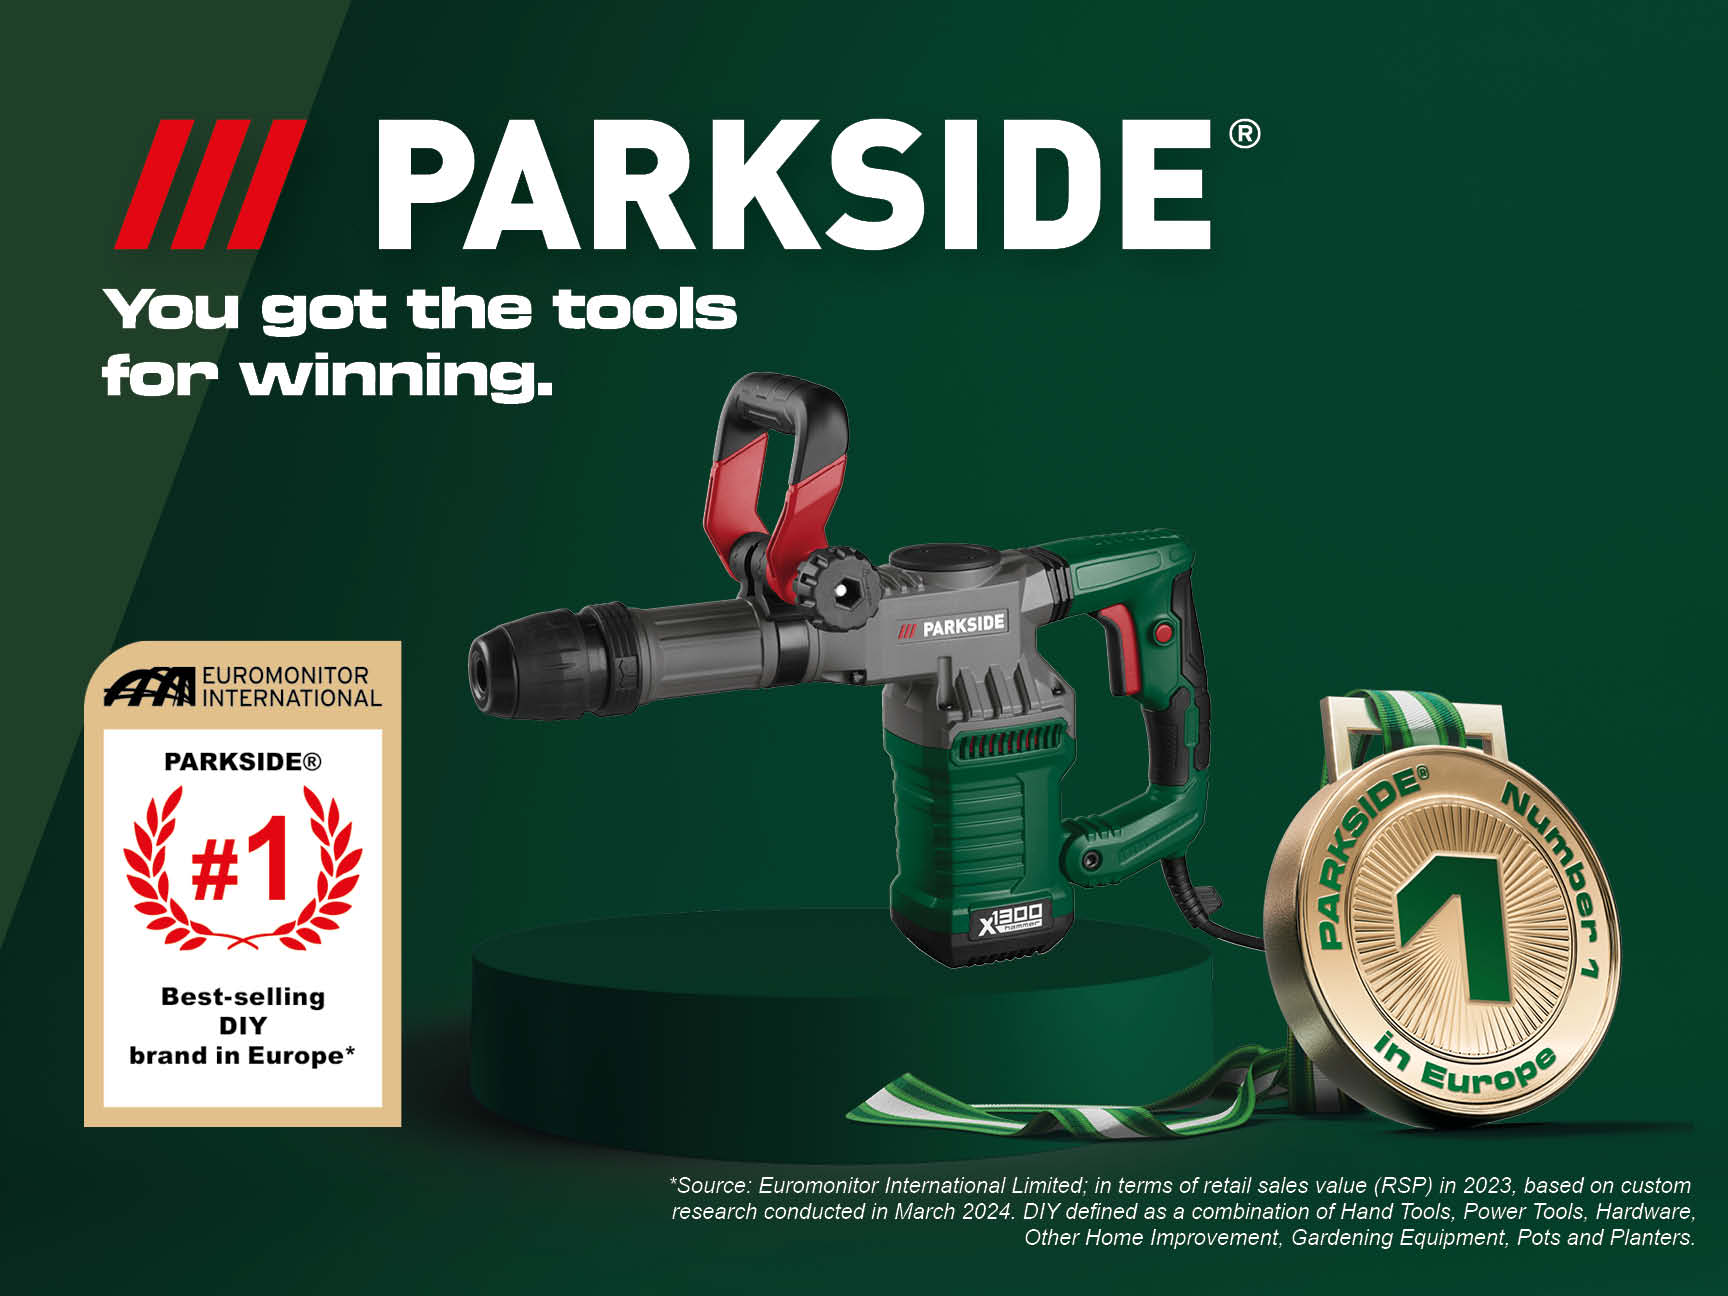 PARKSIDE®: You got the tools for winning